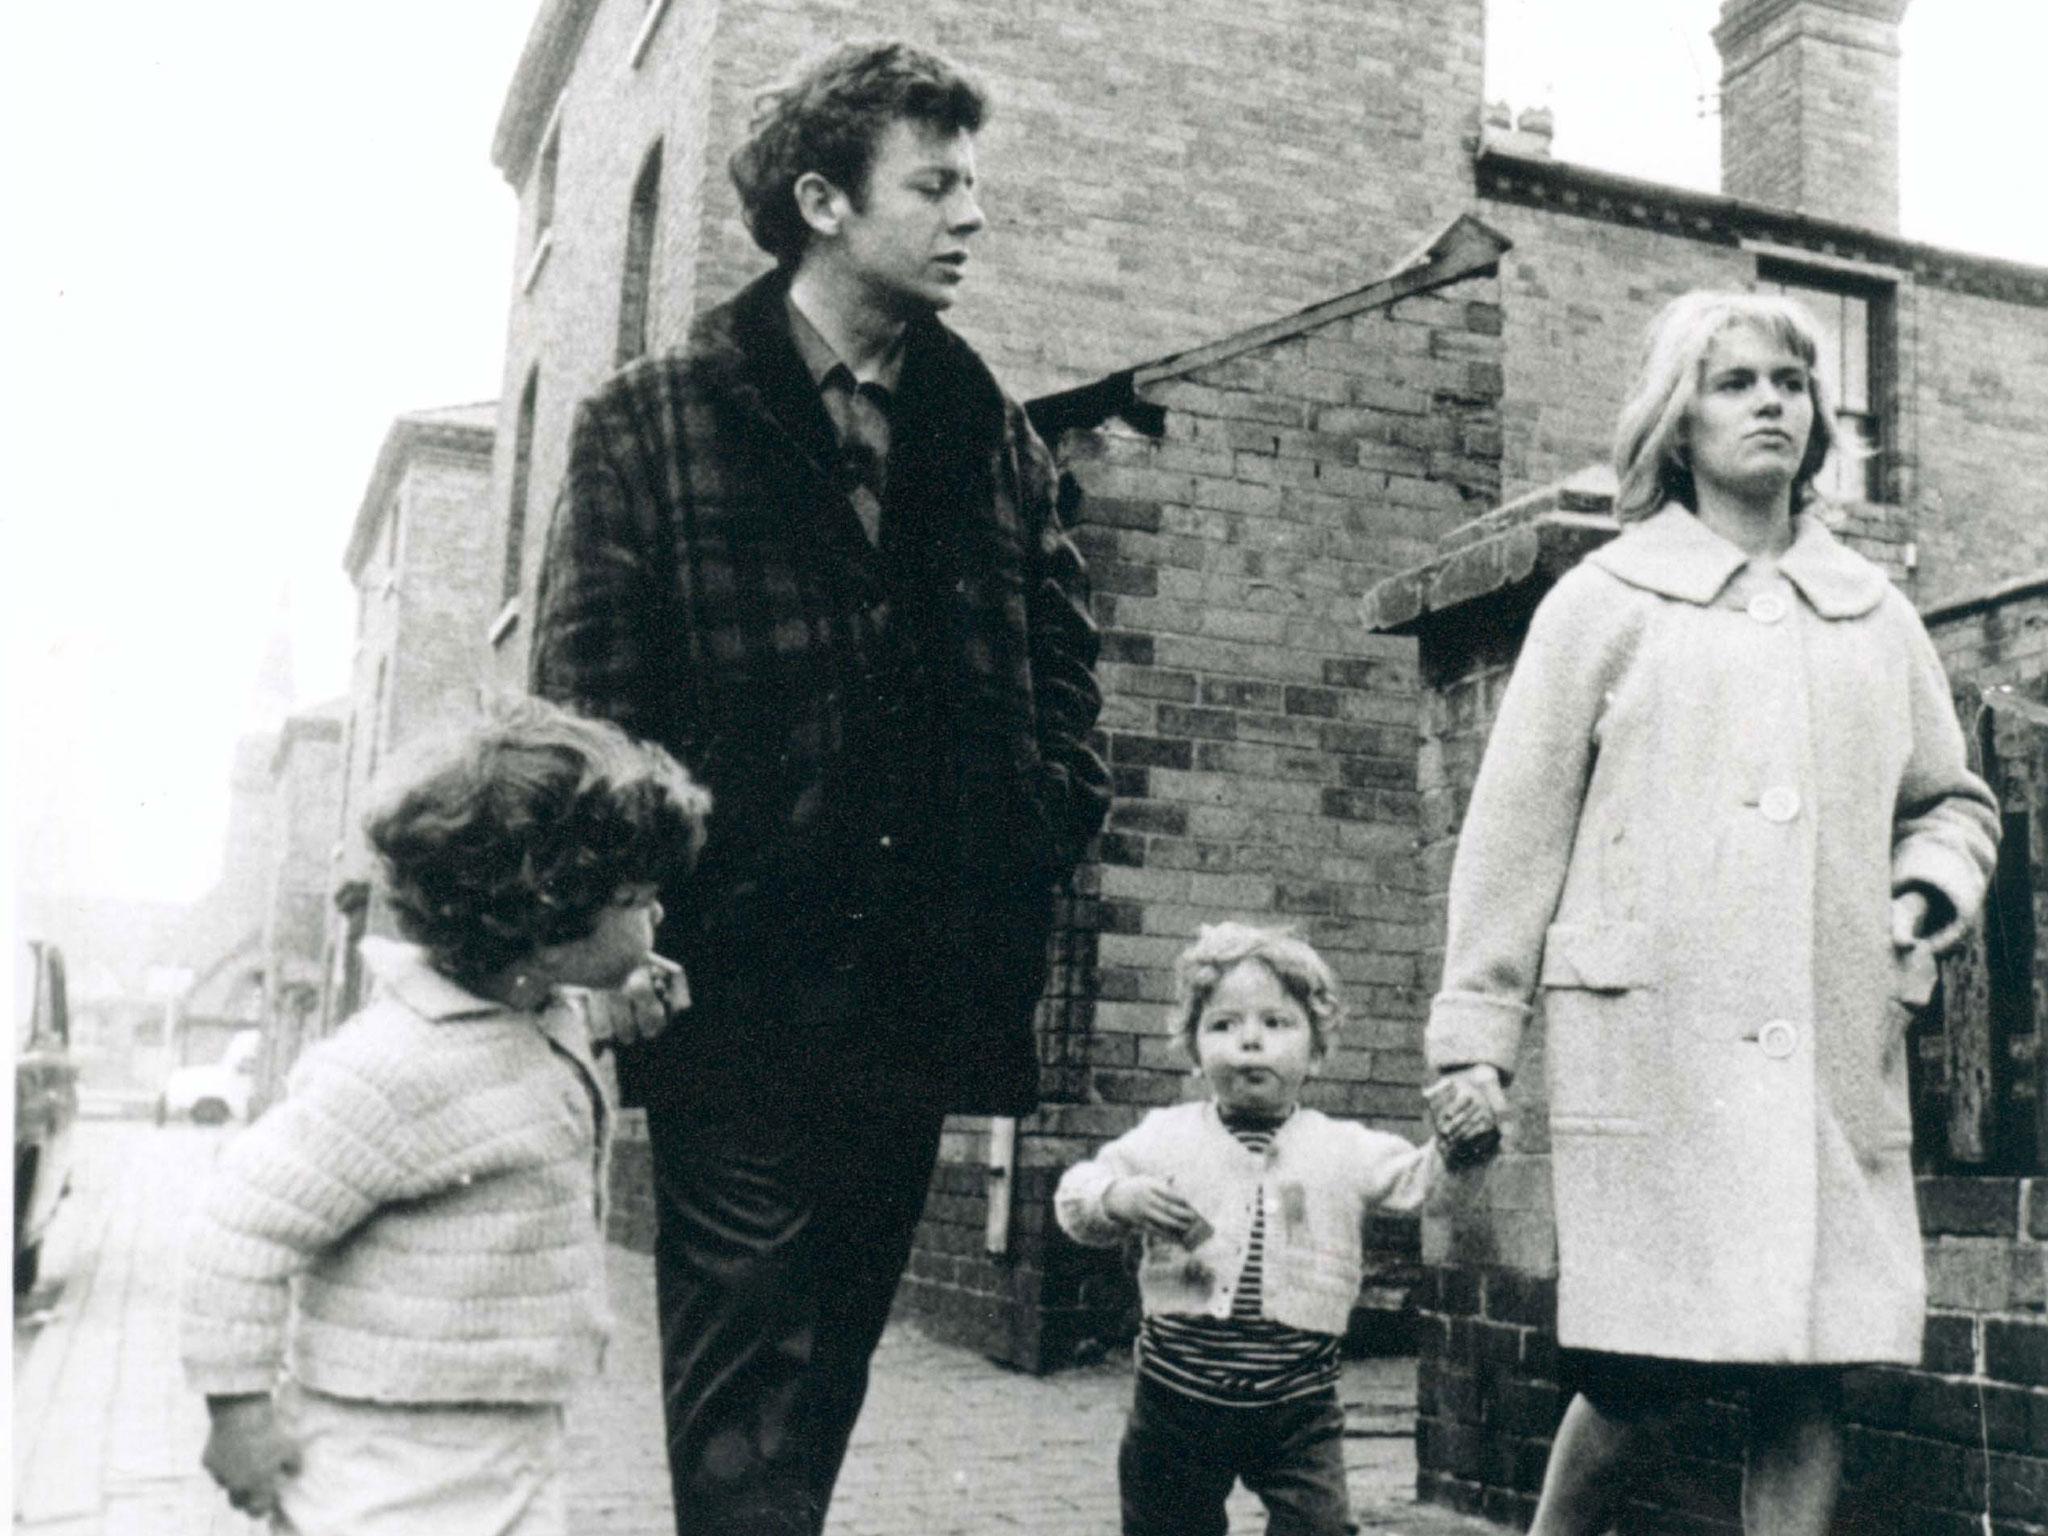 The homelessness charity Crisis was set up in response to the 1966 film ‘Cathy Come Home’